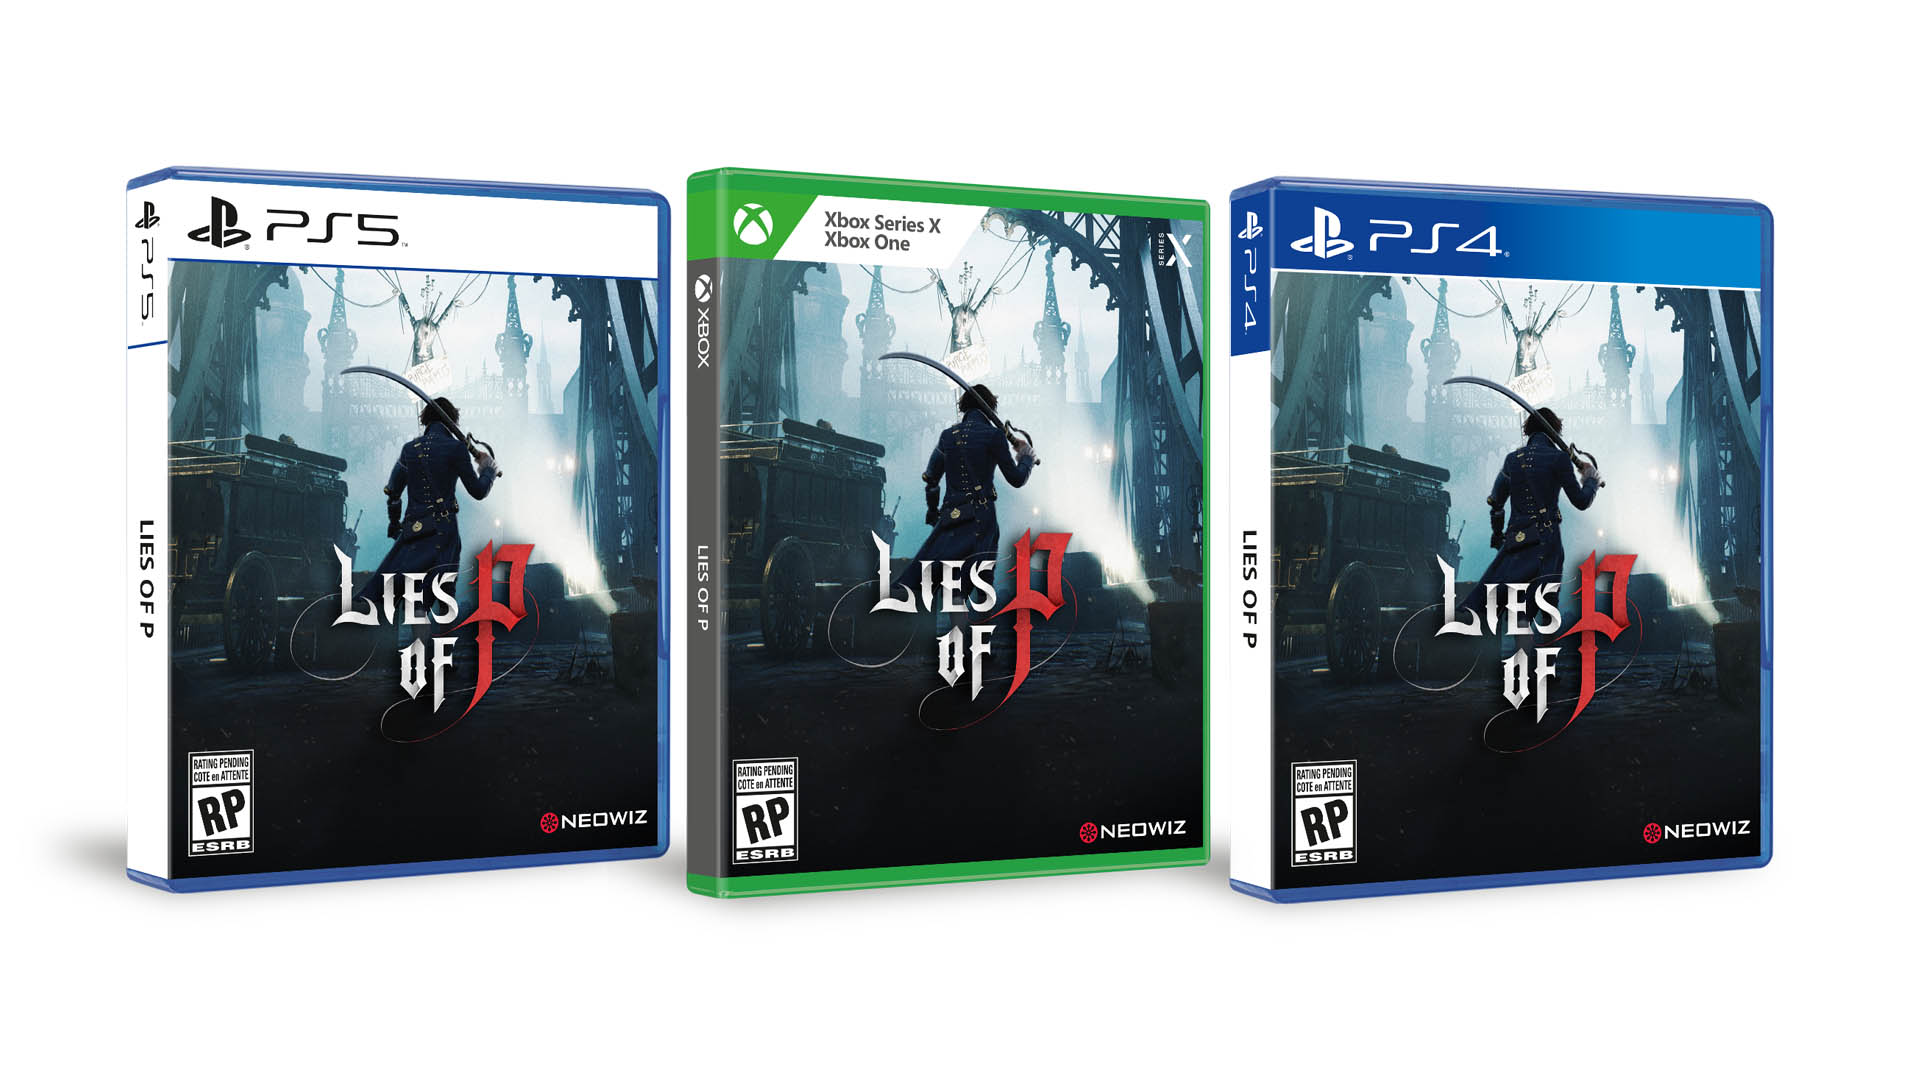 Lies of P is getting a physical release